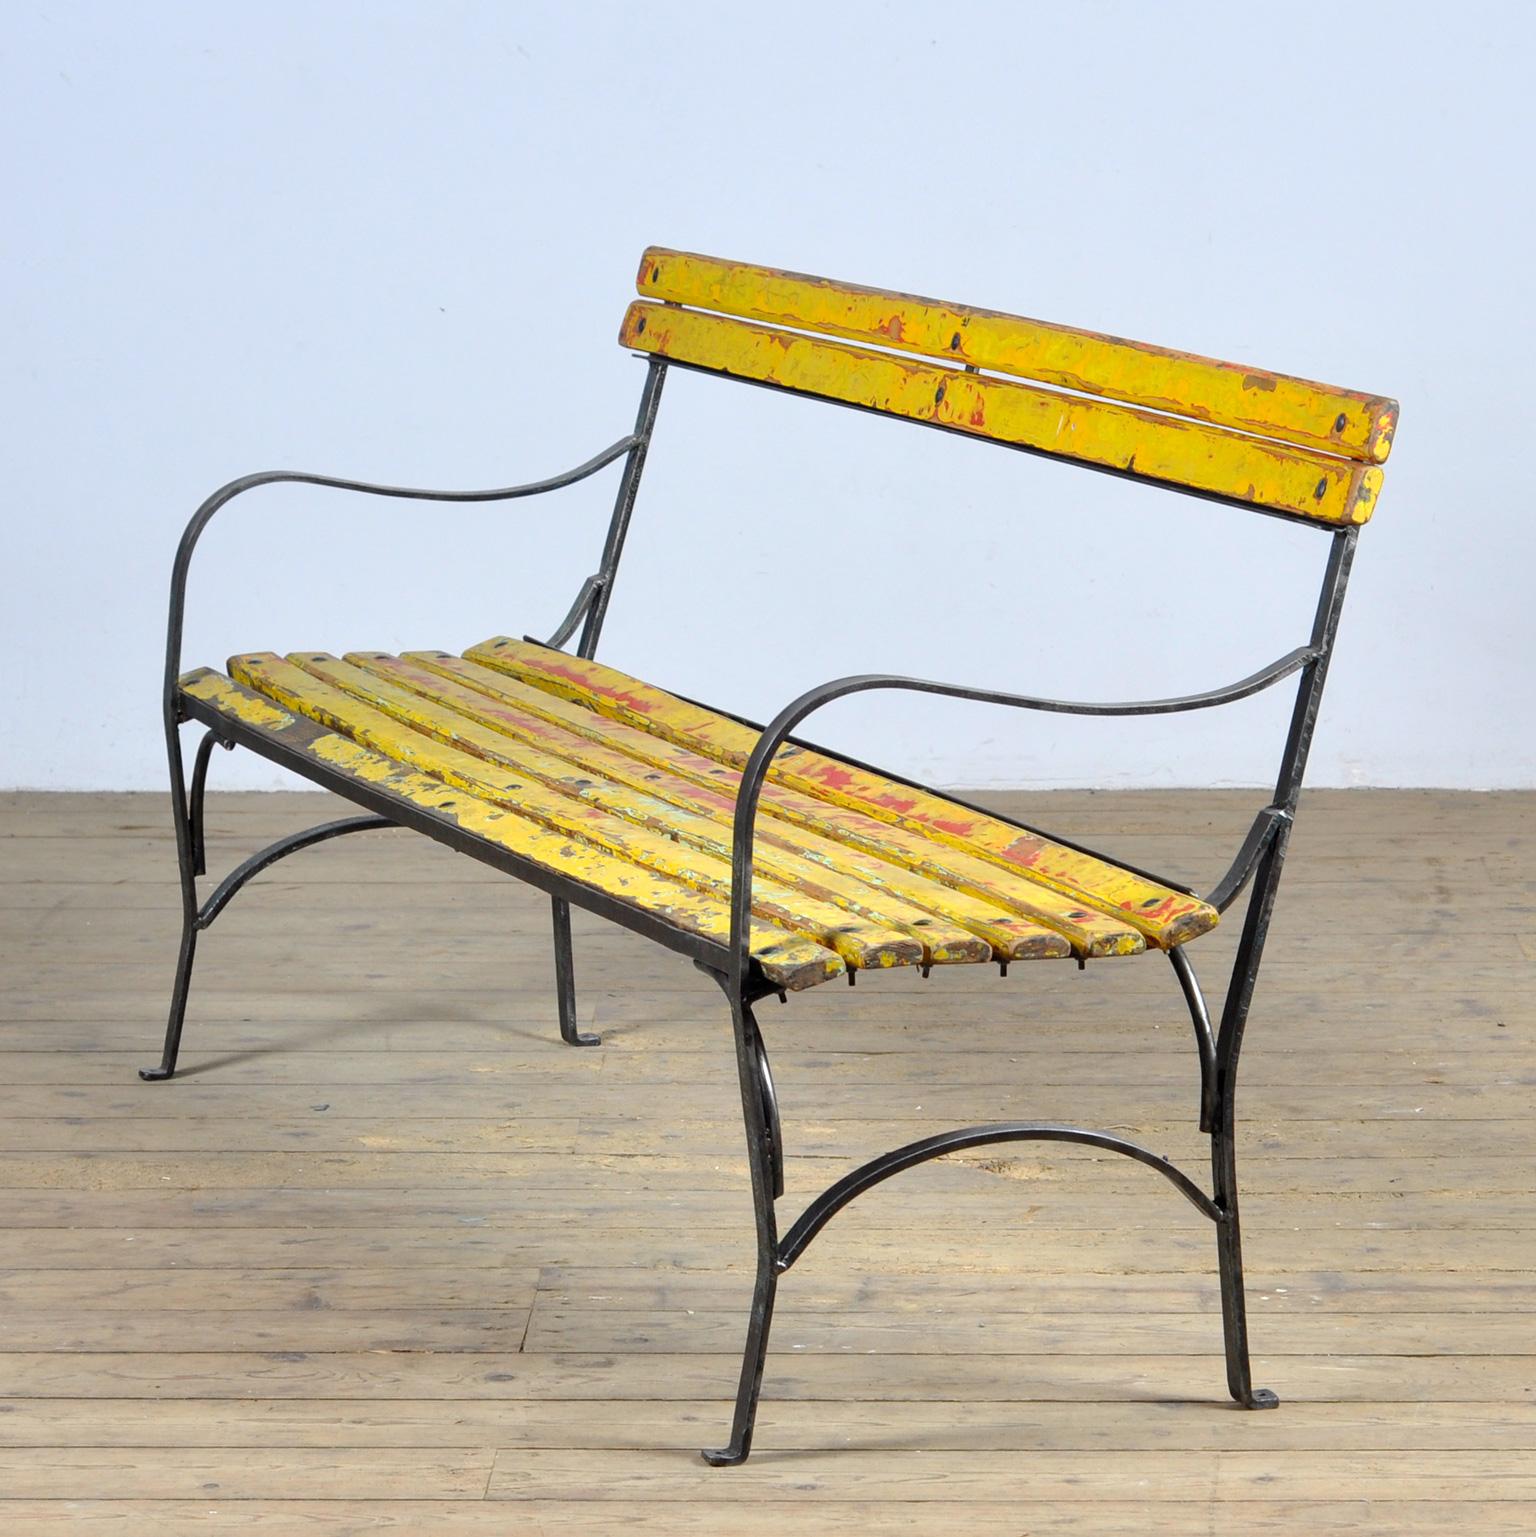 Hungarian Iron Garden Bench 1930s For Sale